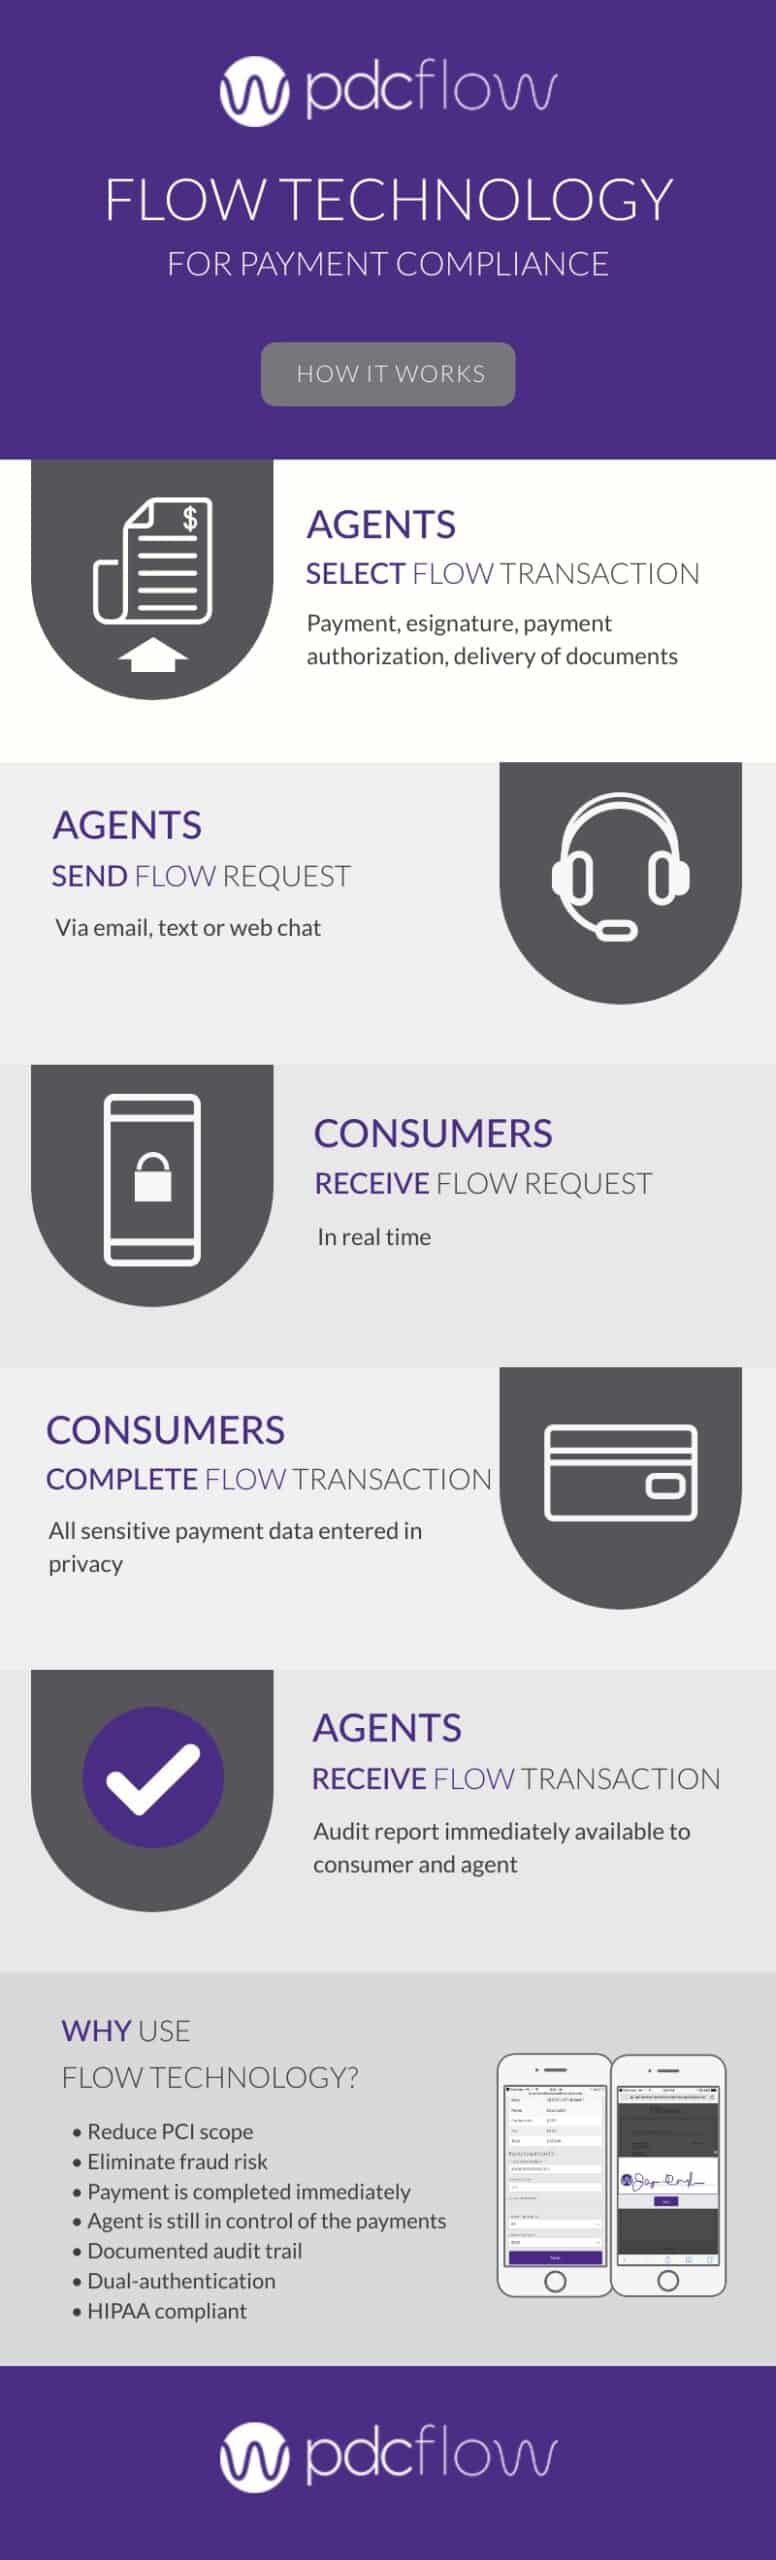 Flow Technology for Payment Compliance Infographic